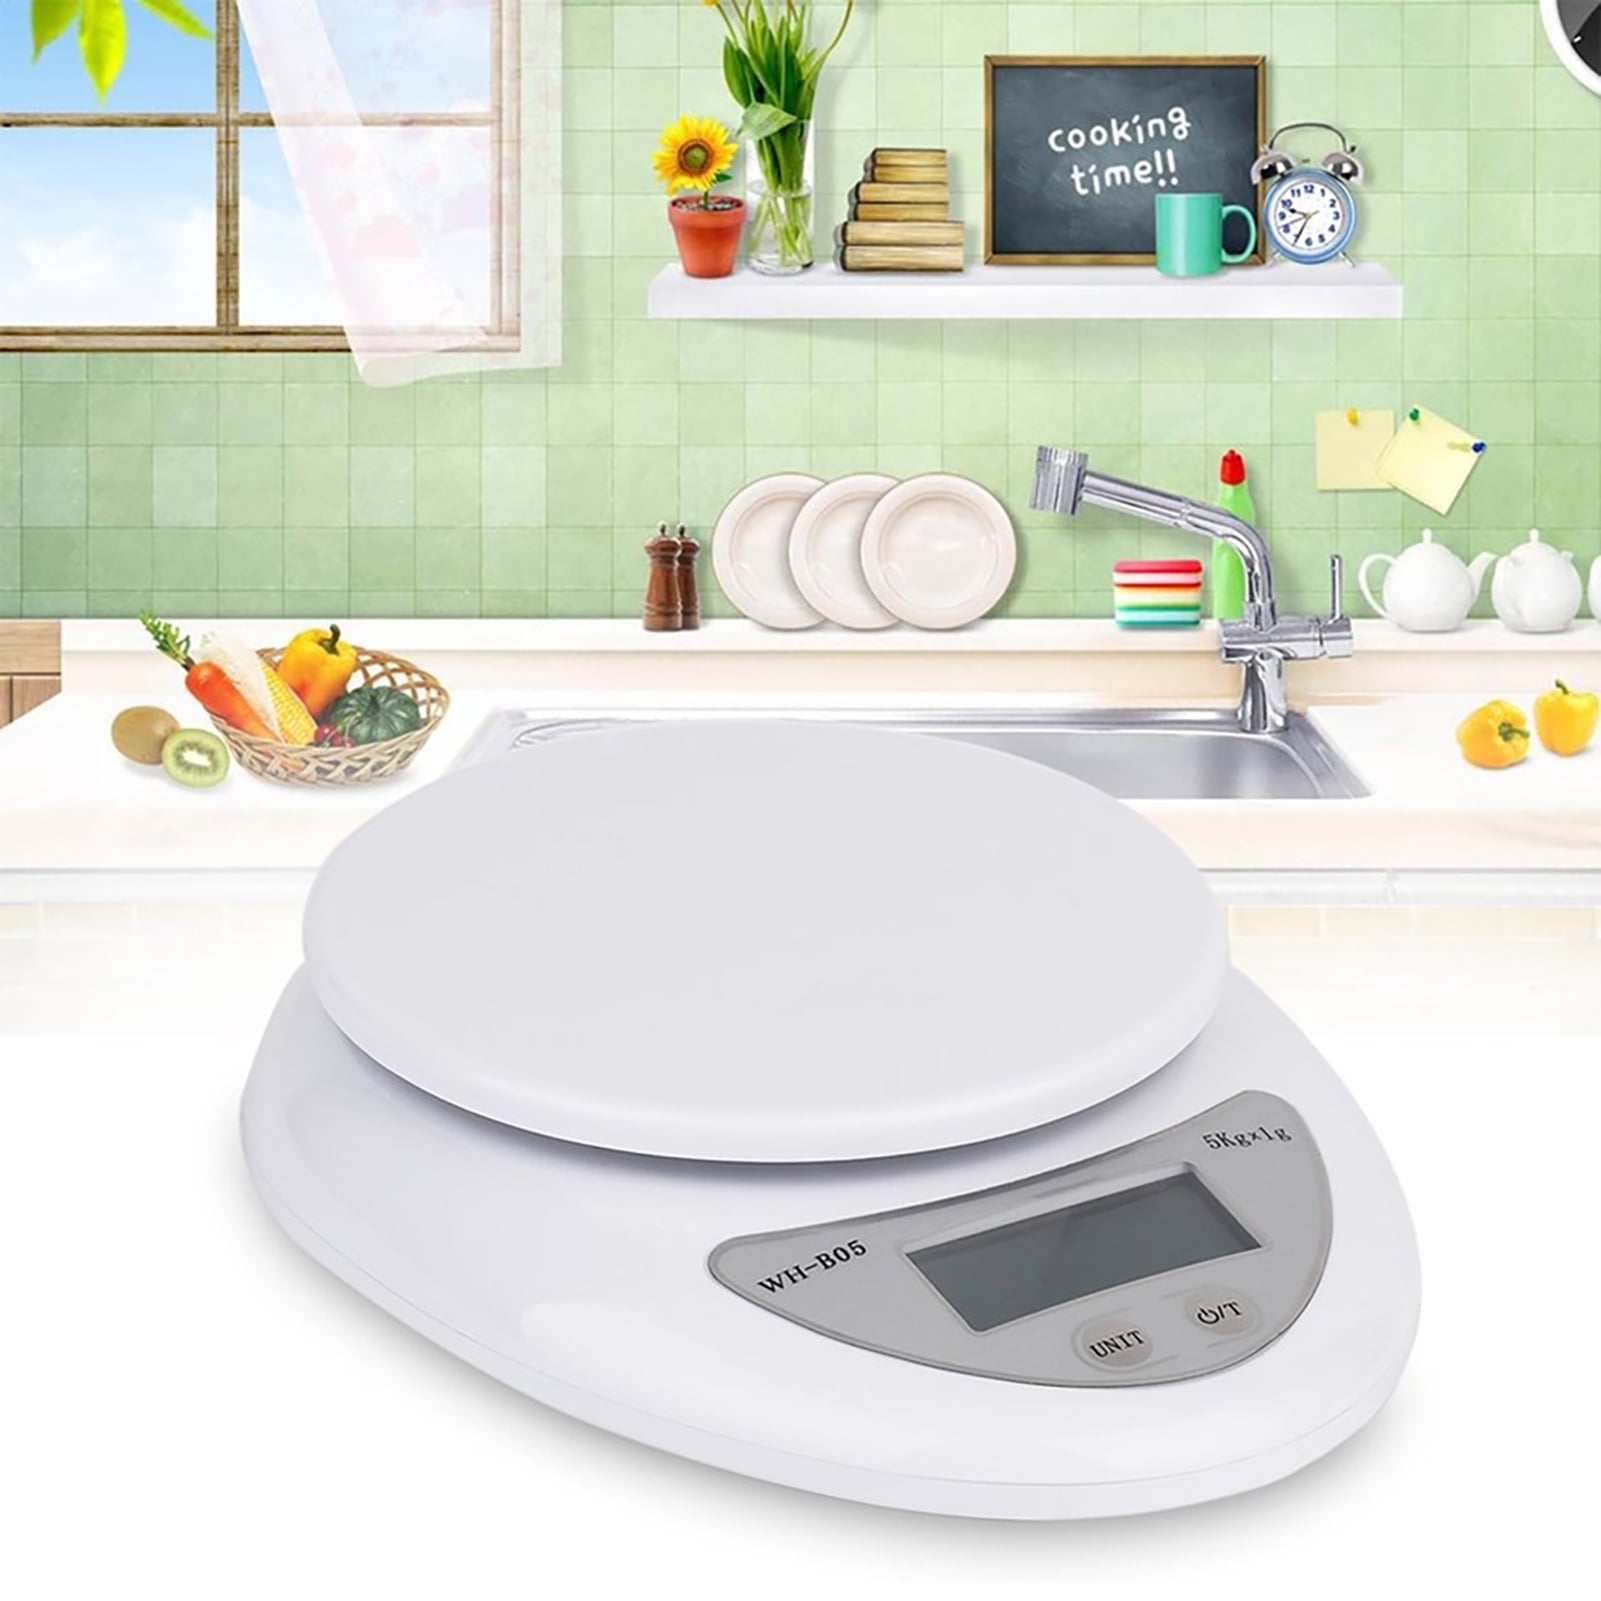 Welltop Digital Pet Scale, Pet Weight Scale Mini Food Weight Scale